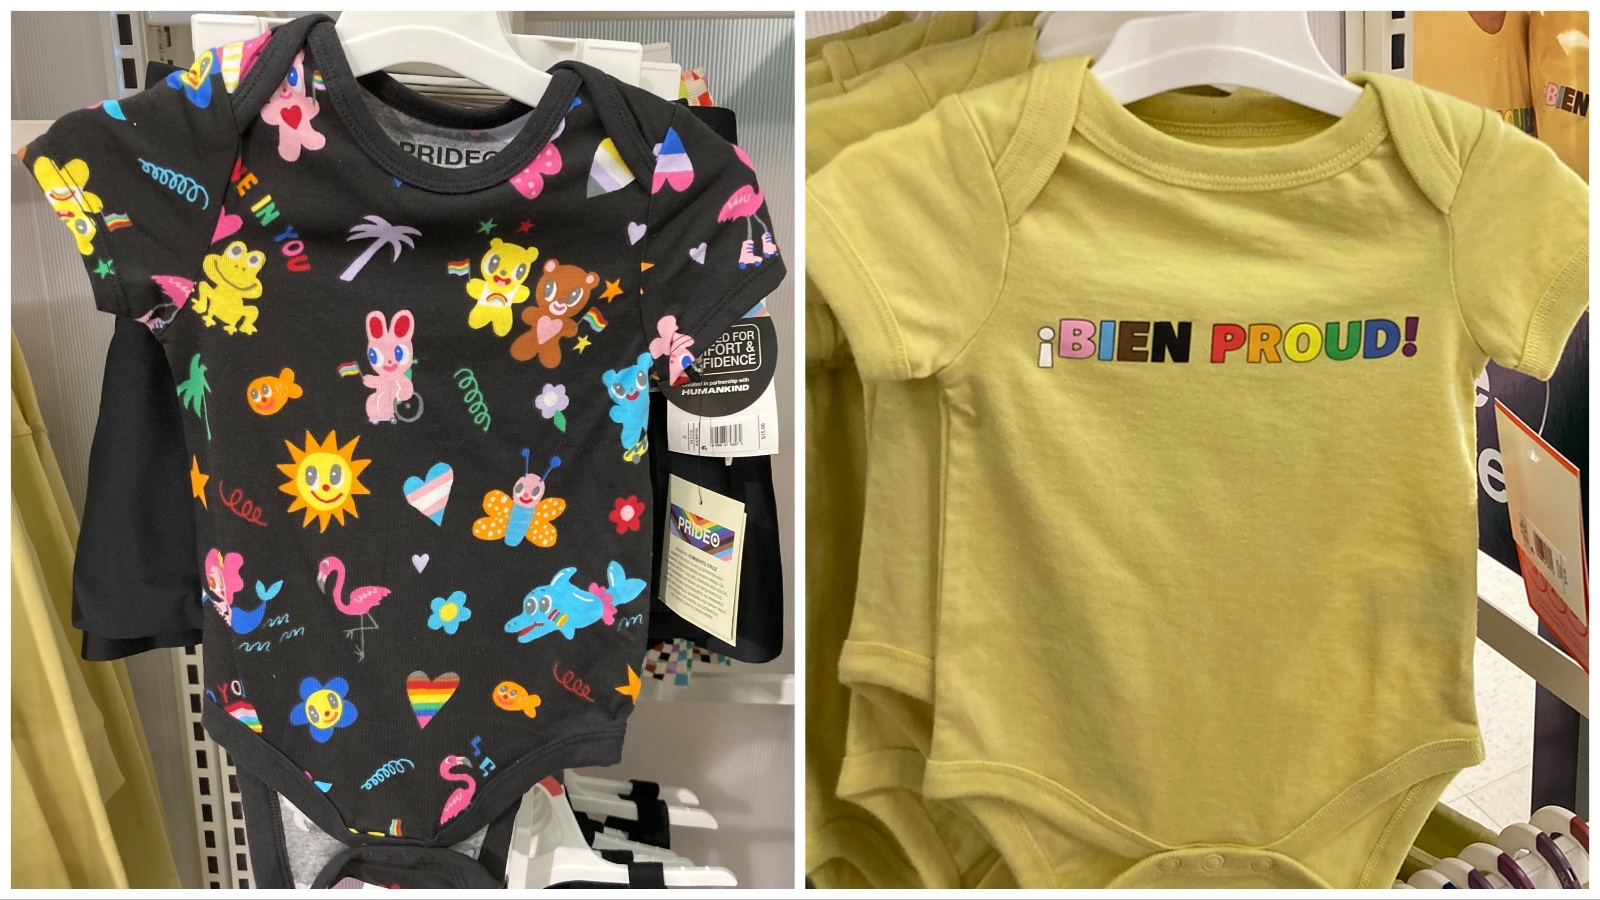 Unlike South, Wyoming's Target Stores Keep LGBTQ 'Pride Collection' Display  For Kids & Adults Up Front